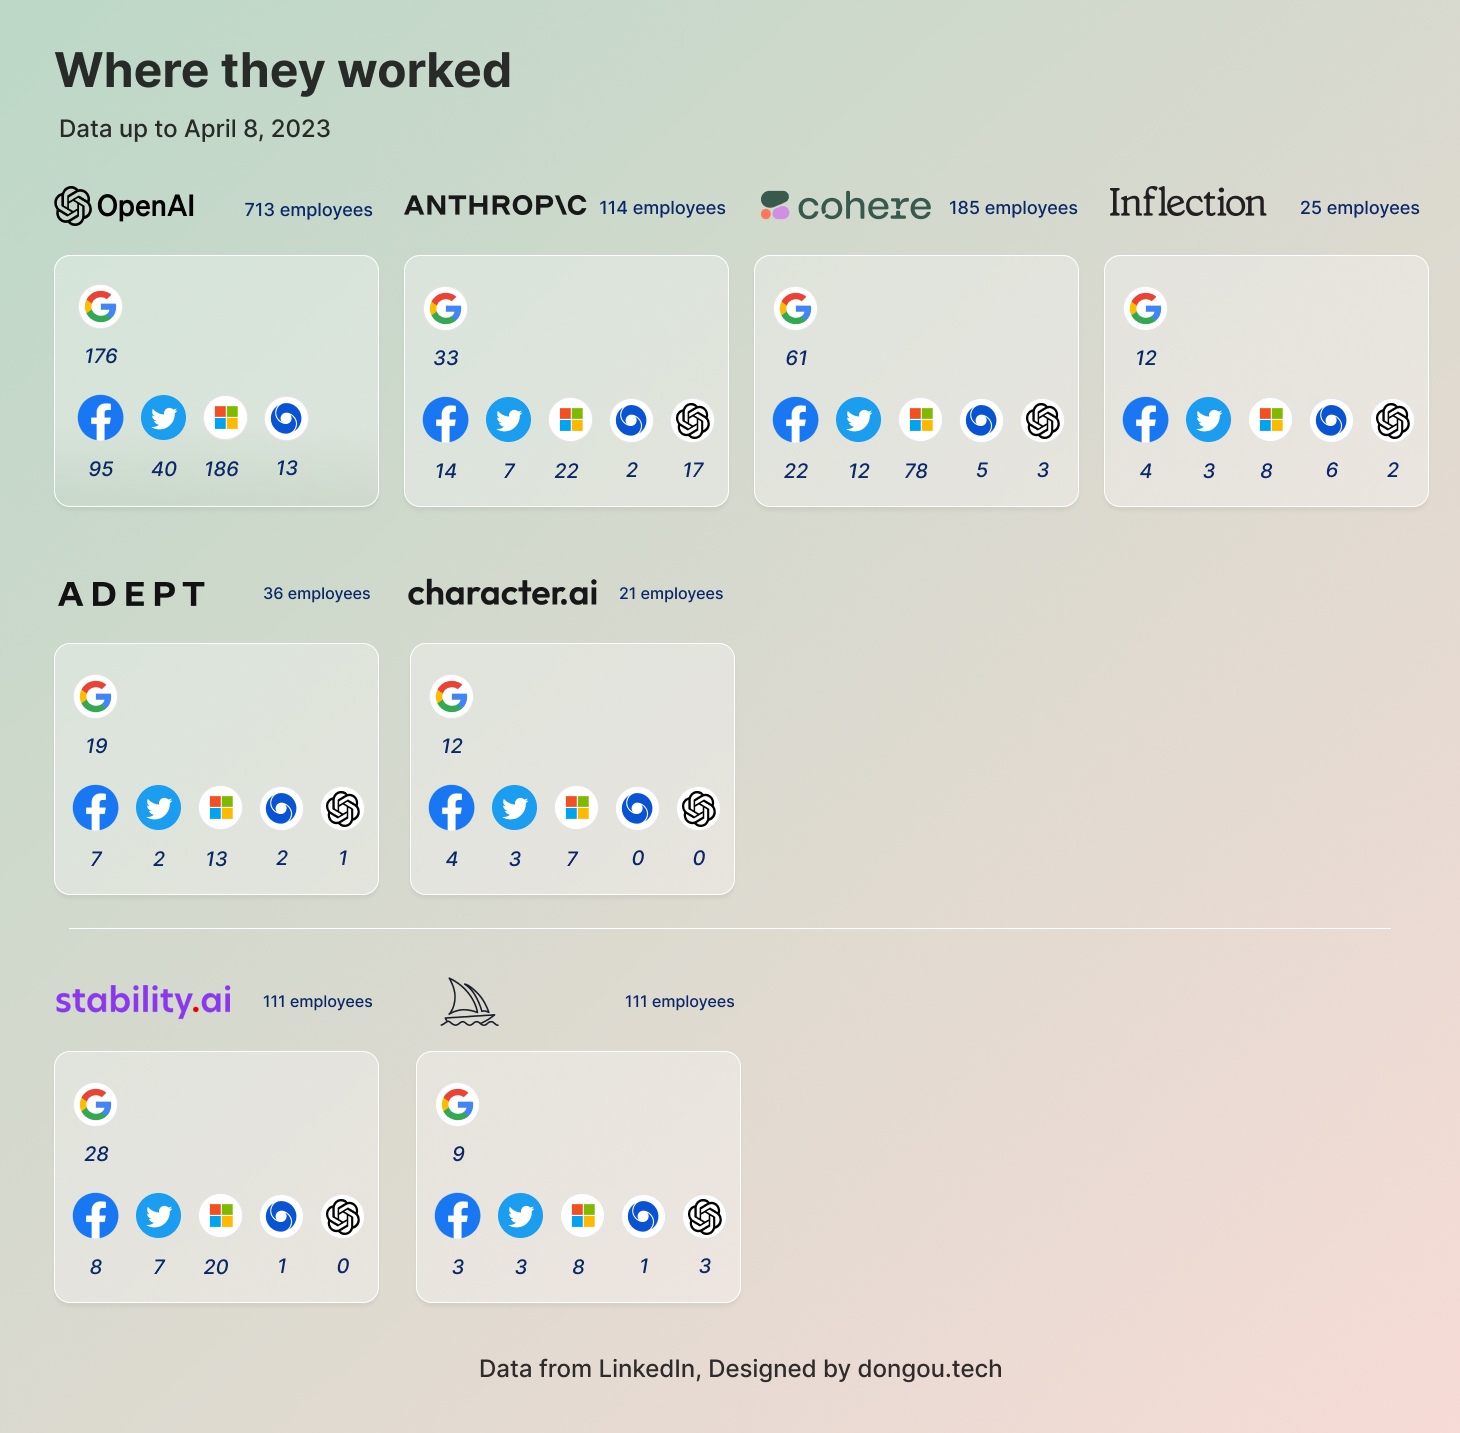 AI start-ups' employees: Where they worked